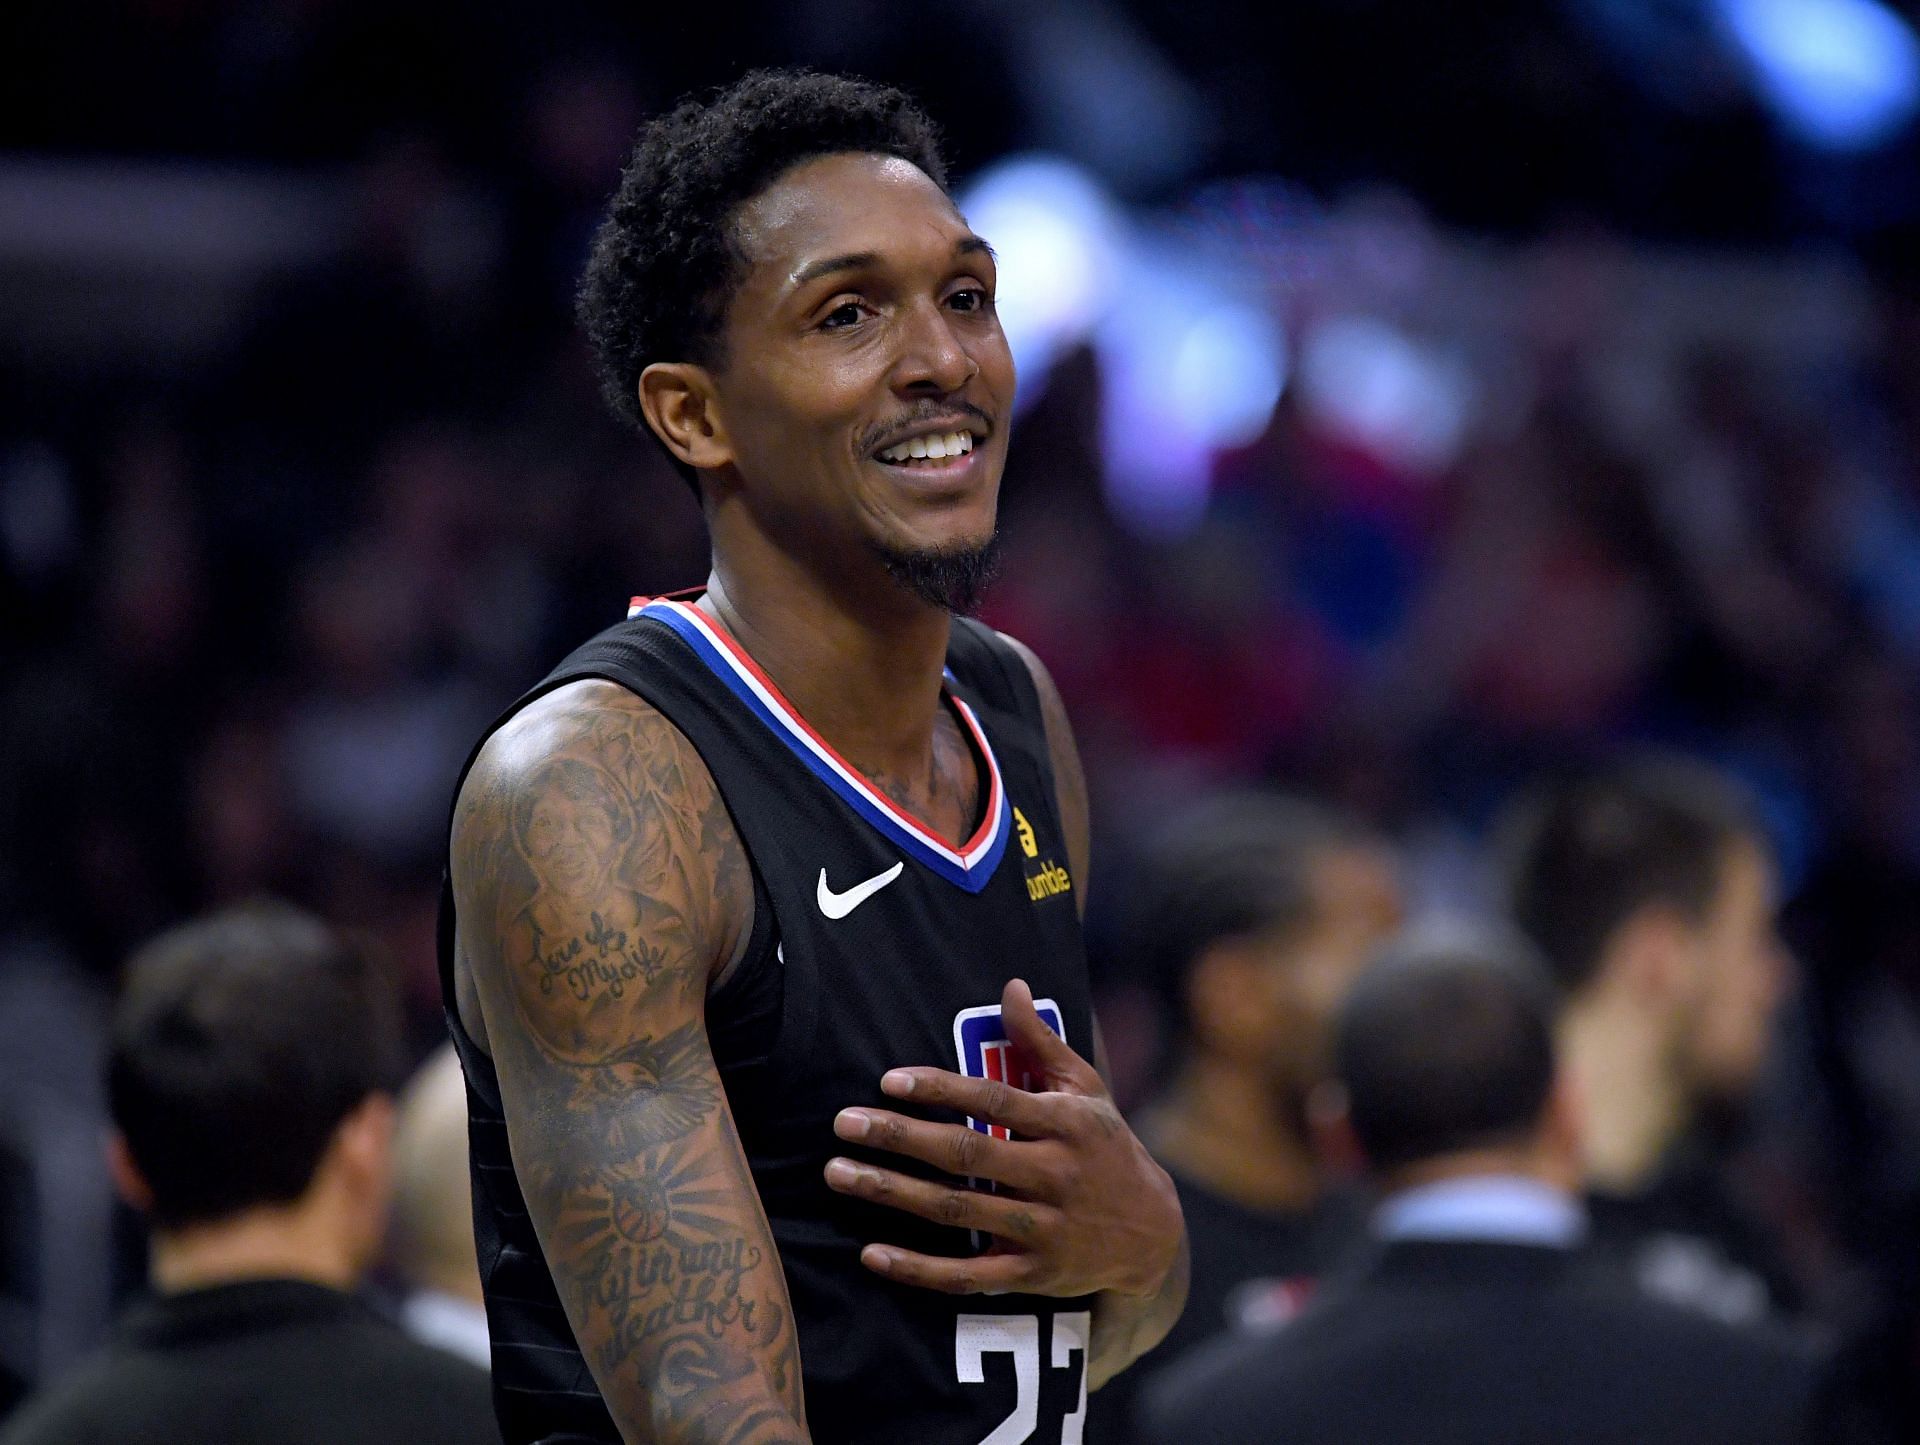 Lou Williams reacts to Twitter user pointing out he had 2 wives